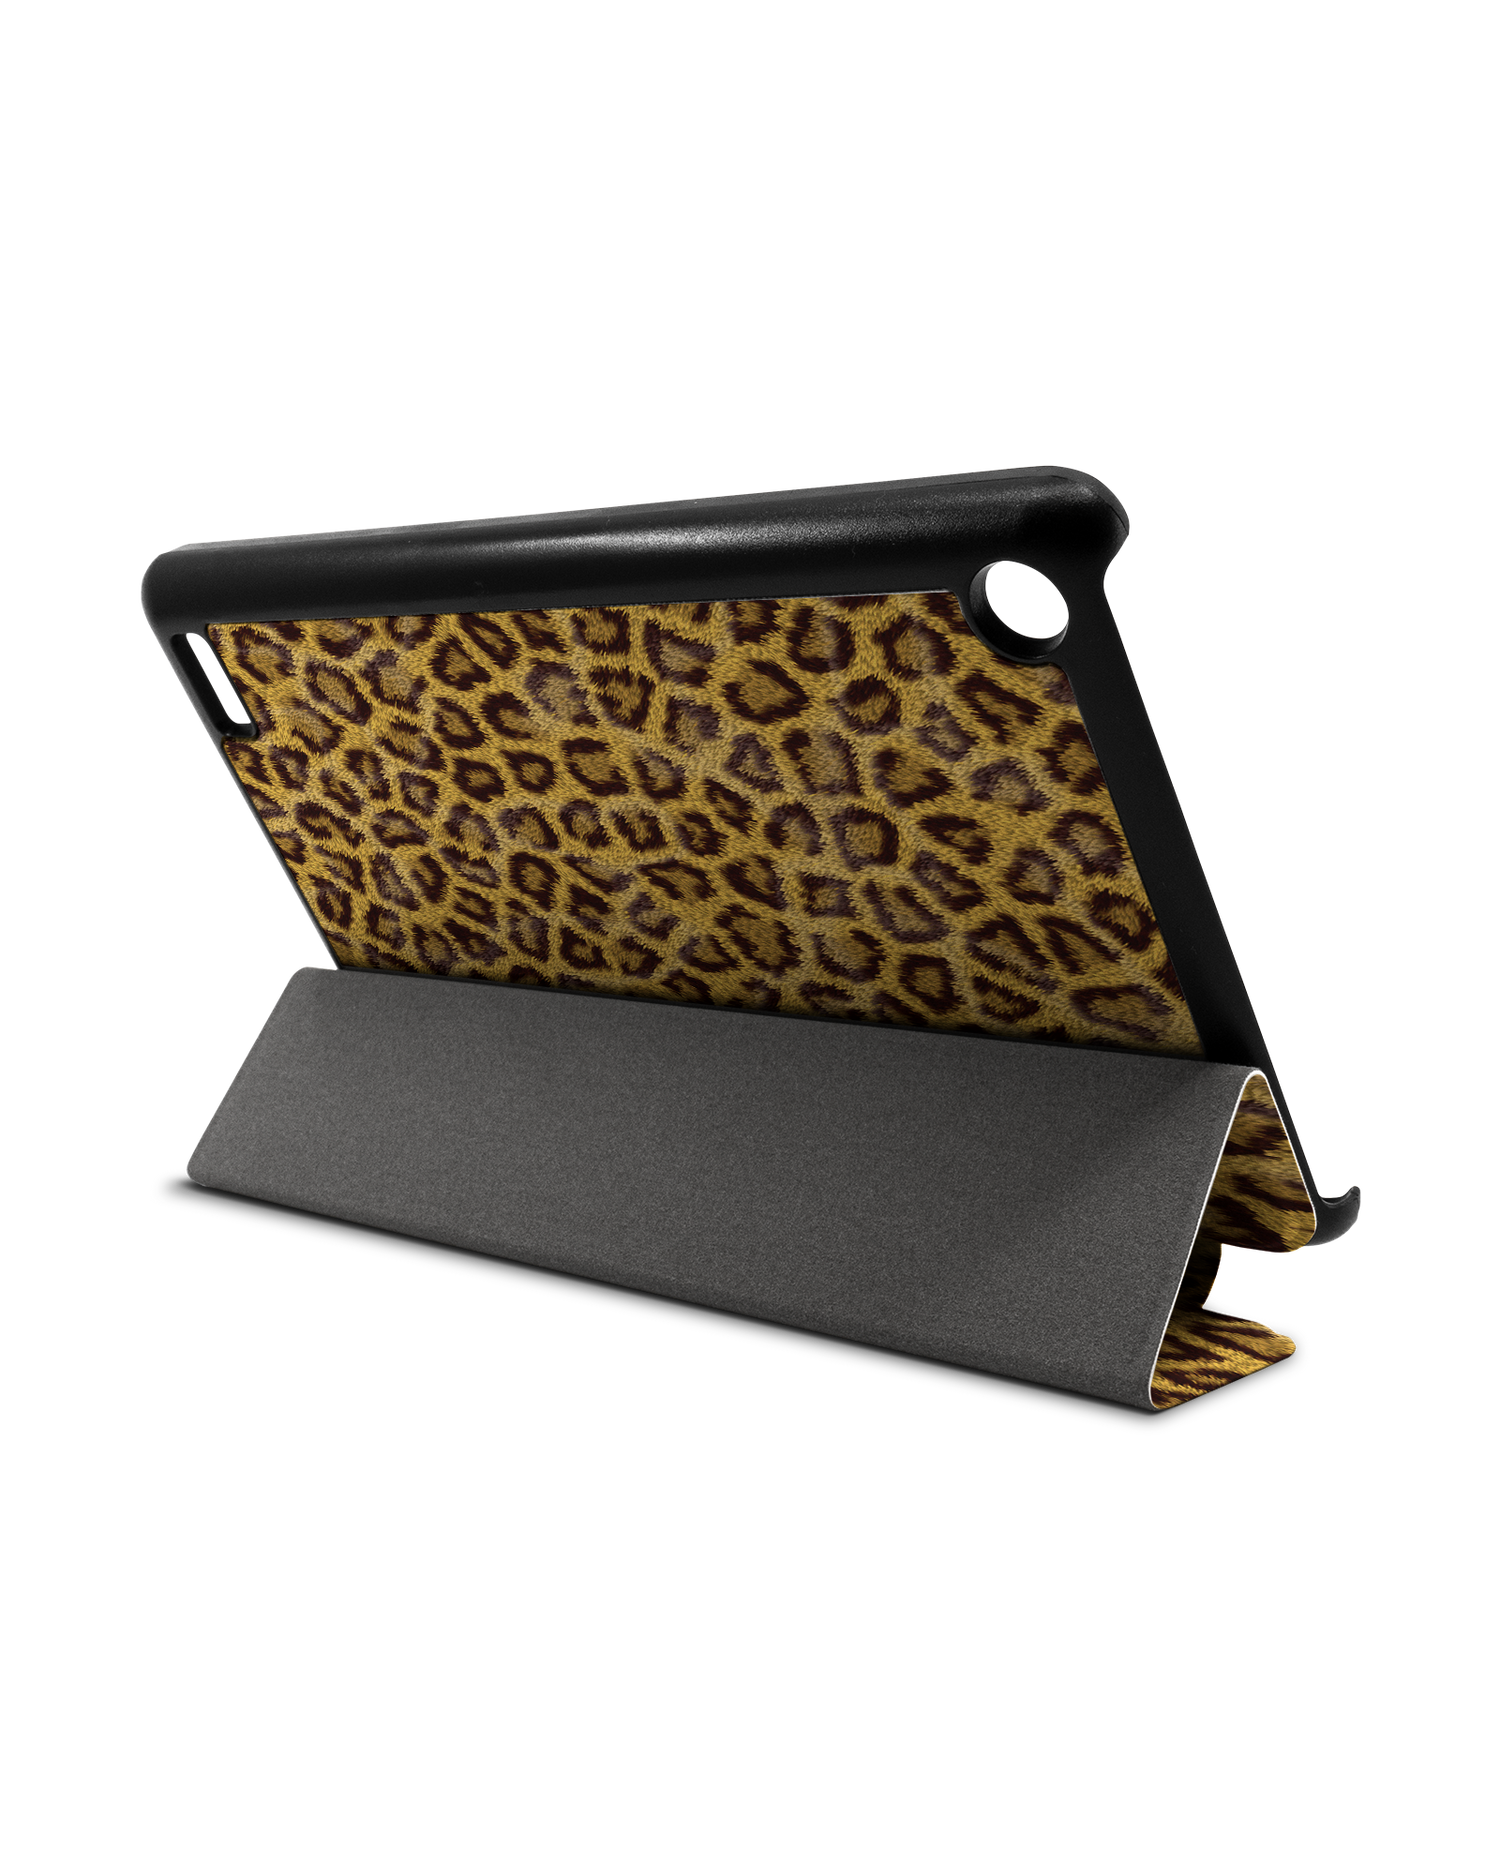 Leopard Skin Tablet Smart Case for Amazon Fire 7: Used as Stand